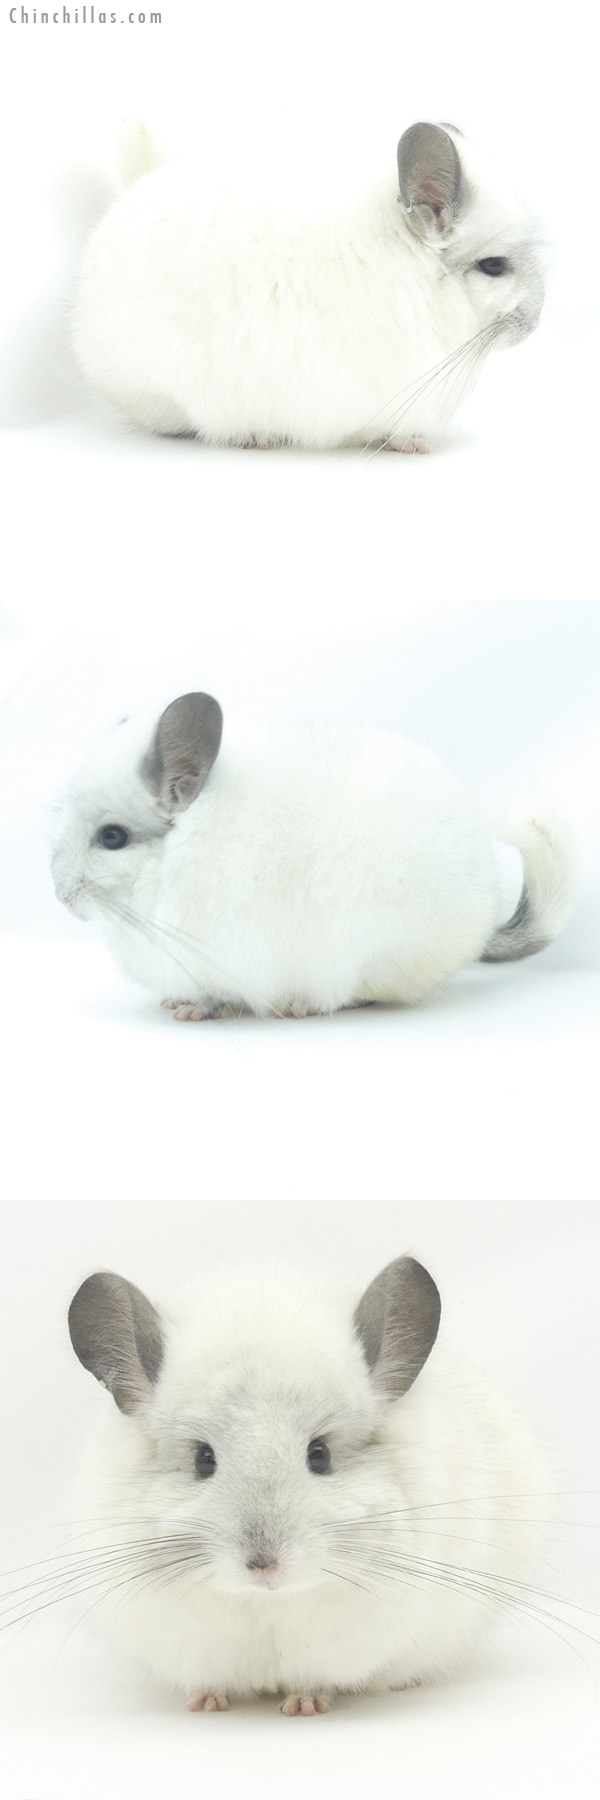 Chinchilla or related item offered for sale or export on Chinchillas.com - 19407 Blocky Predominantly White  Royal Persian Angora Male Chinchilla